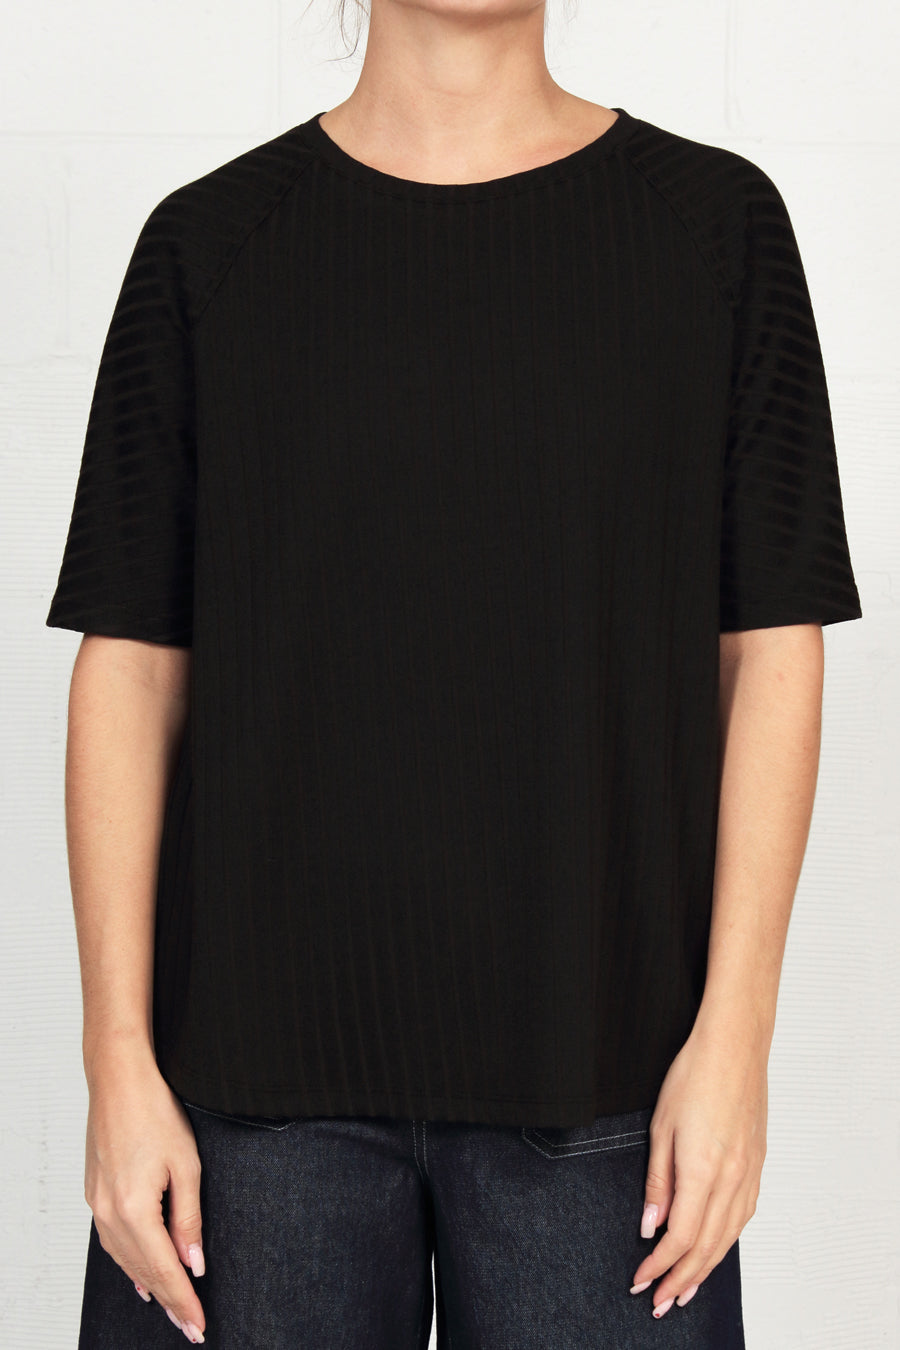 Wide Rib Knit Front Top - black